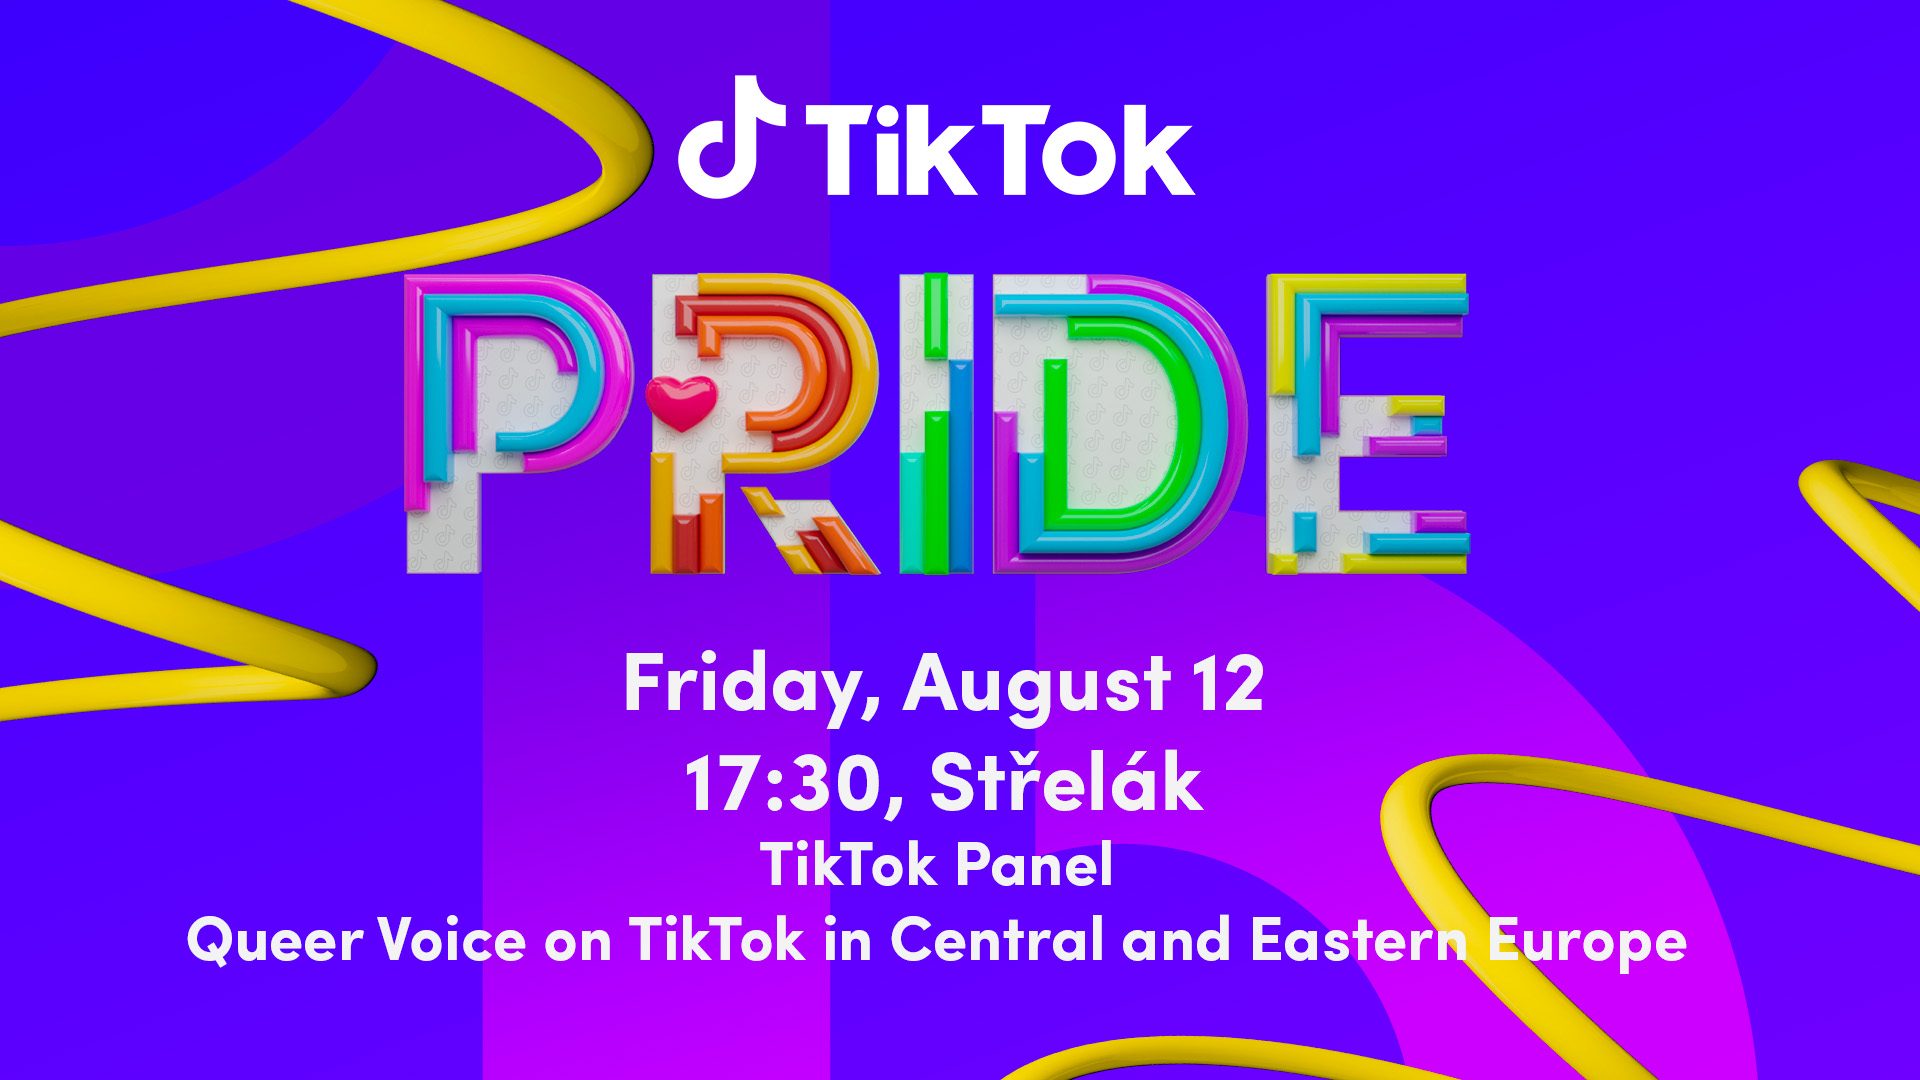 TikTok Panel: Queer Voice on TikTok in Central and Eastern Europe